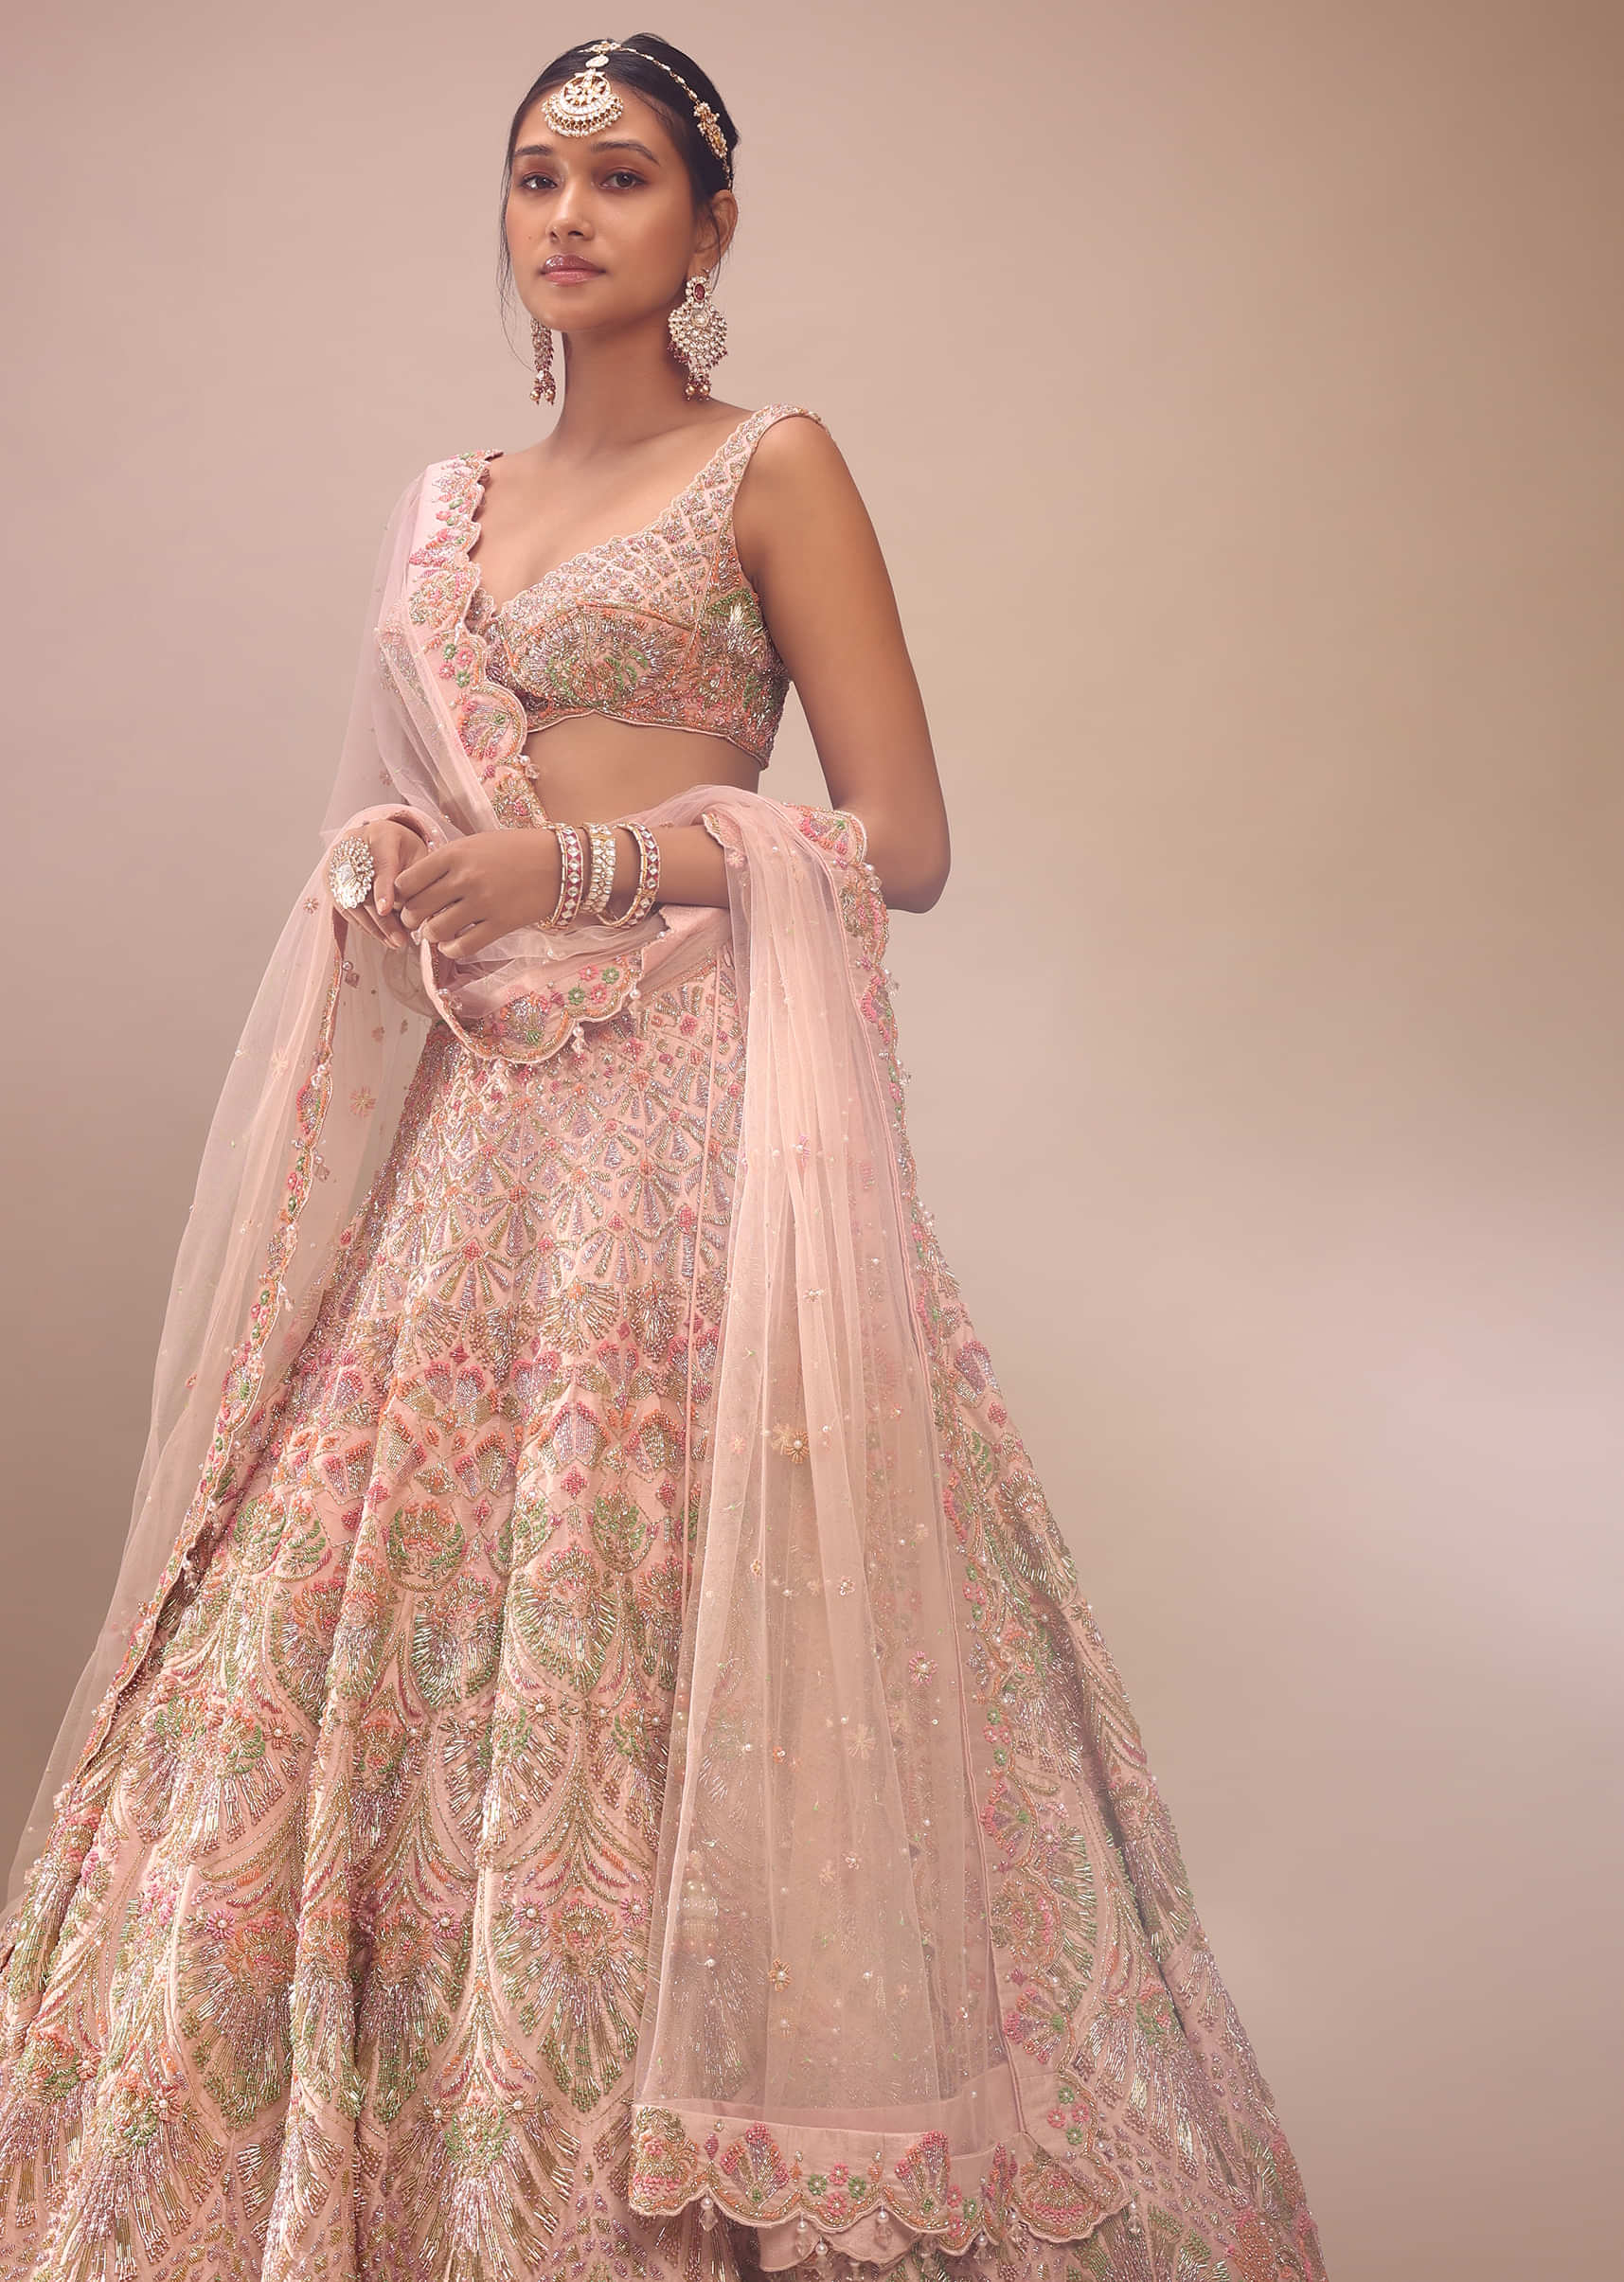 Pink Lehenga And Sleeveless Crop Top Set With A Corset Neckline In Zardozi Embroidery